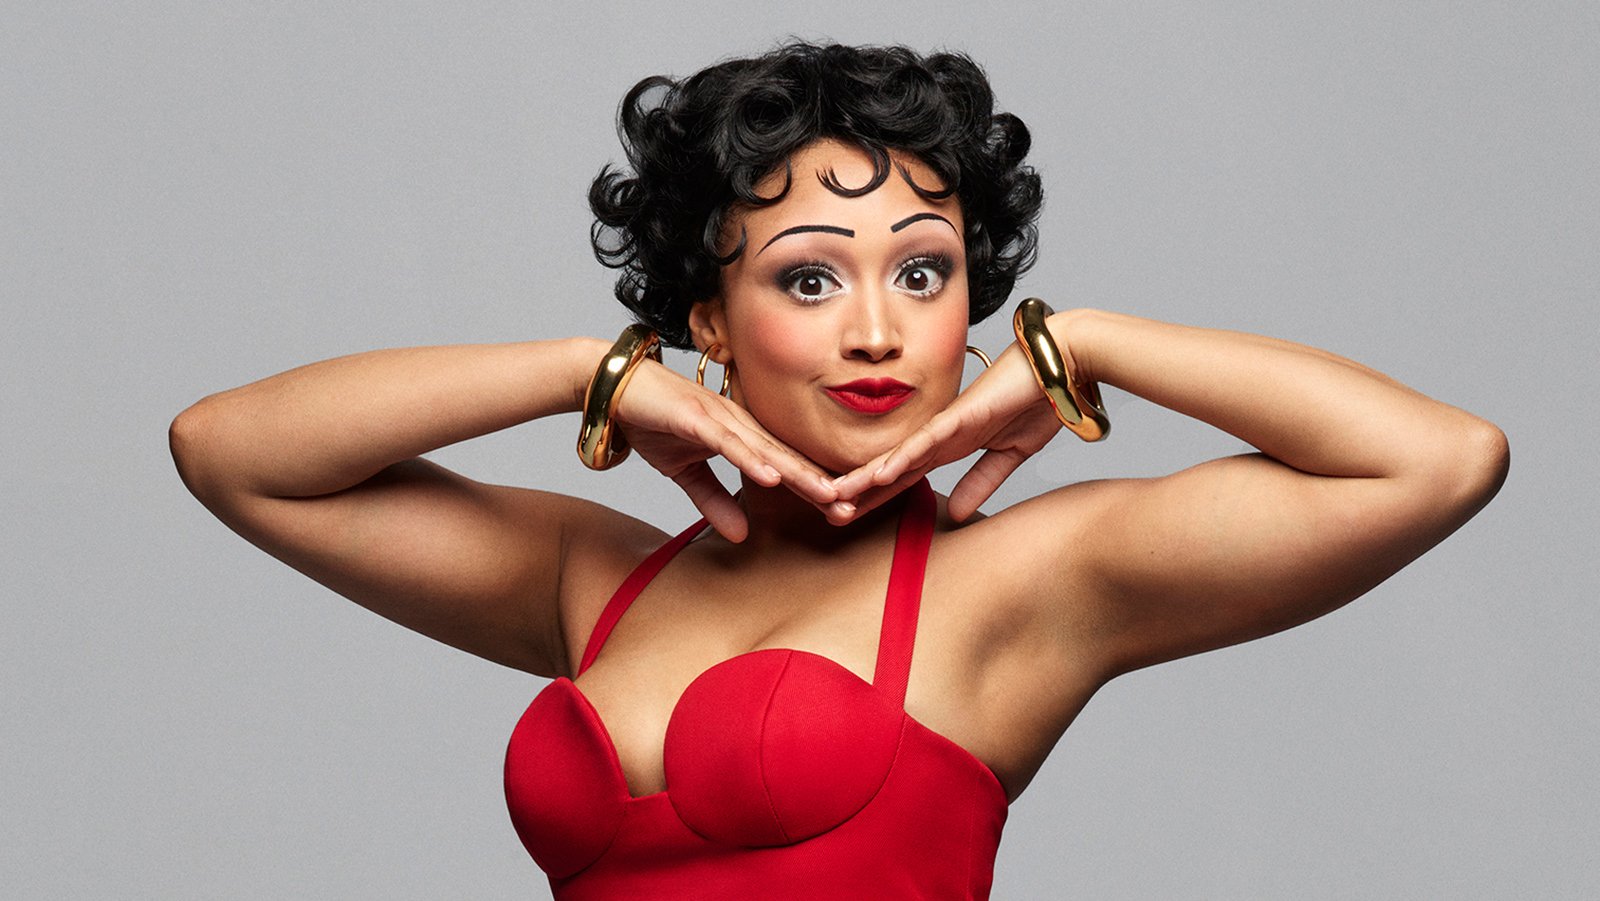 How Betty Boop became a feminist icon